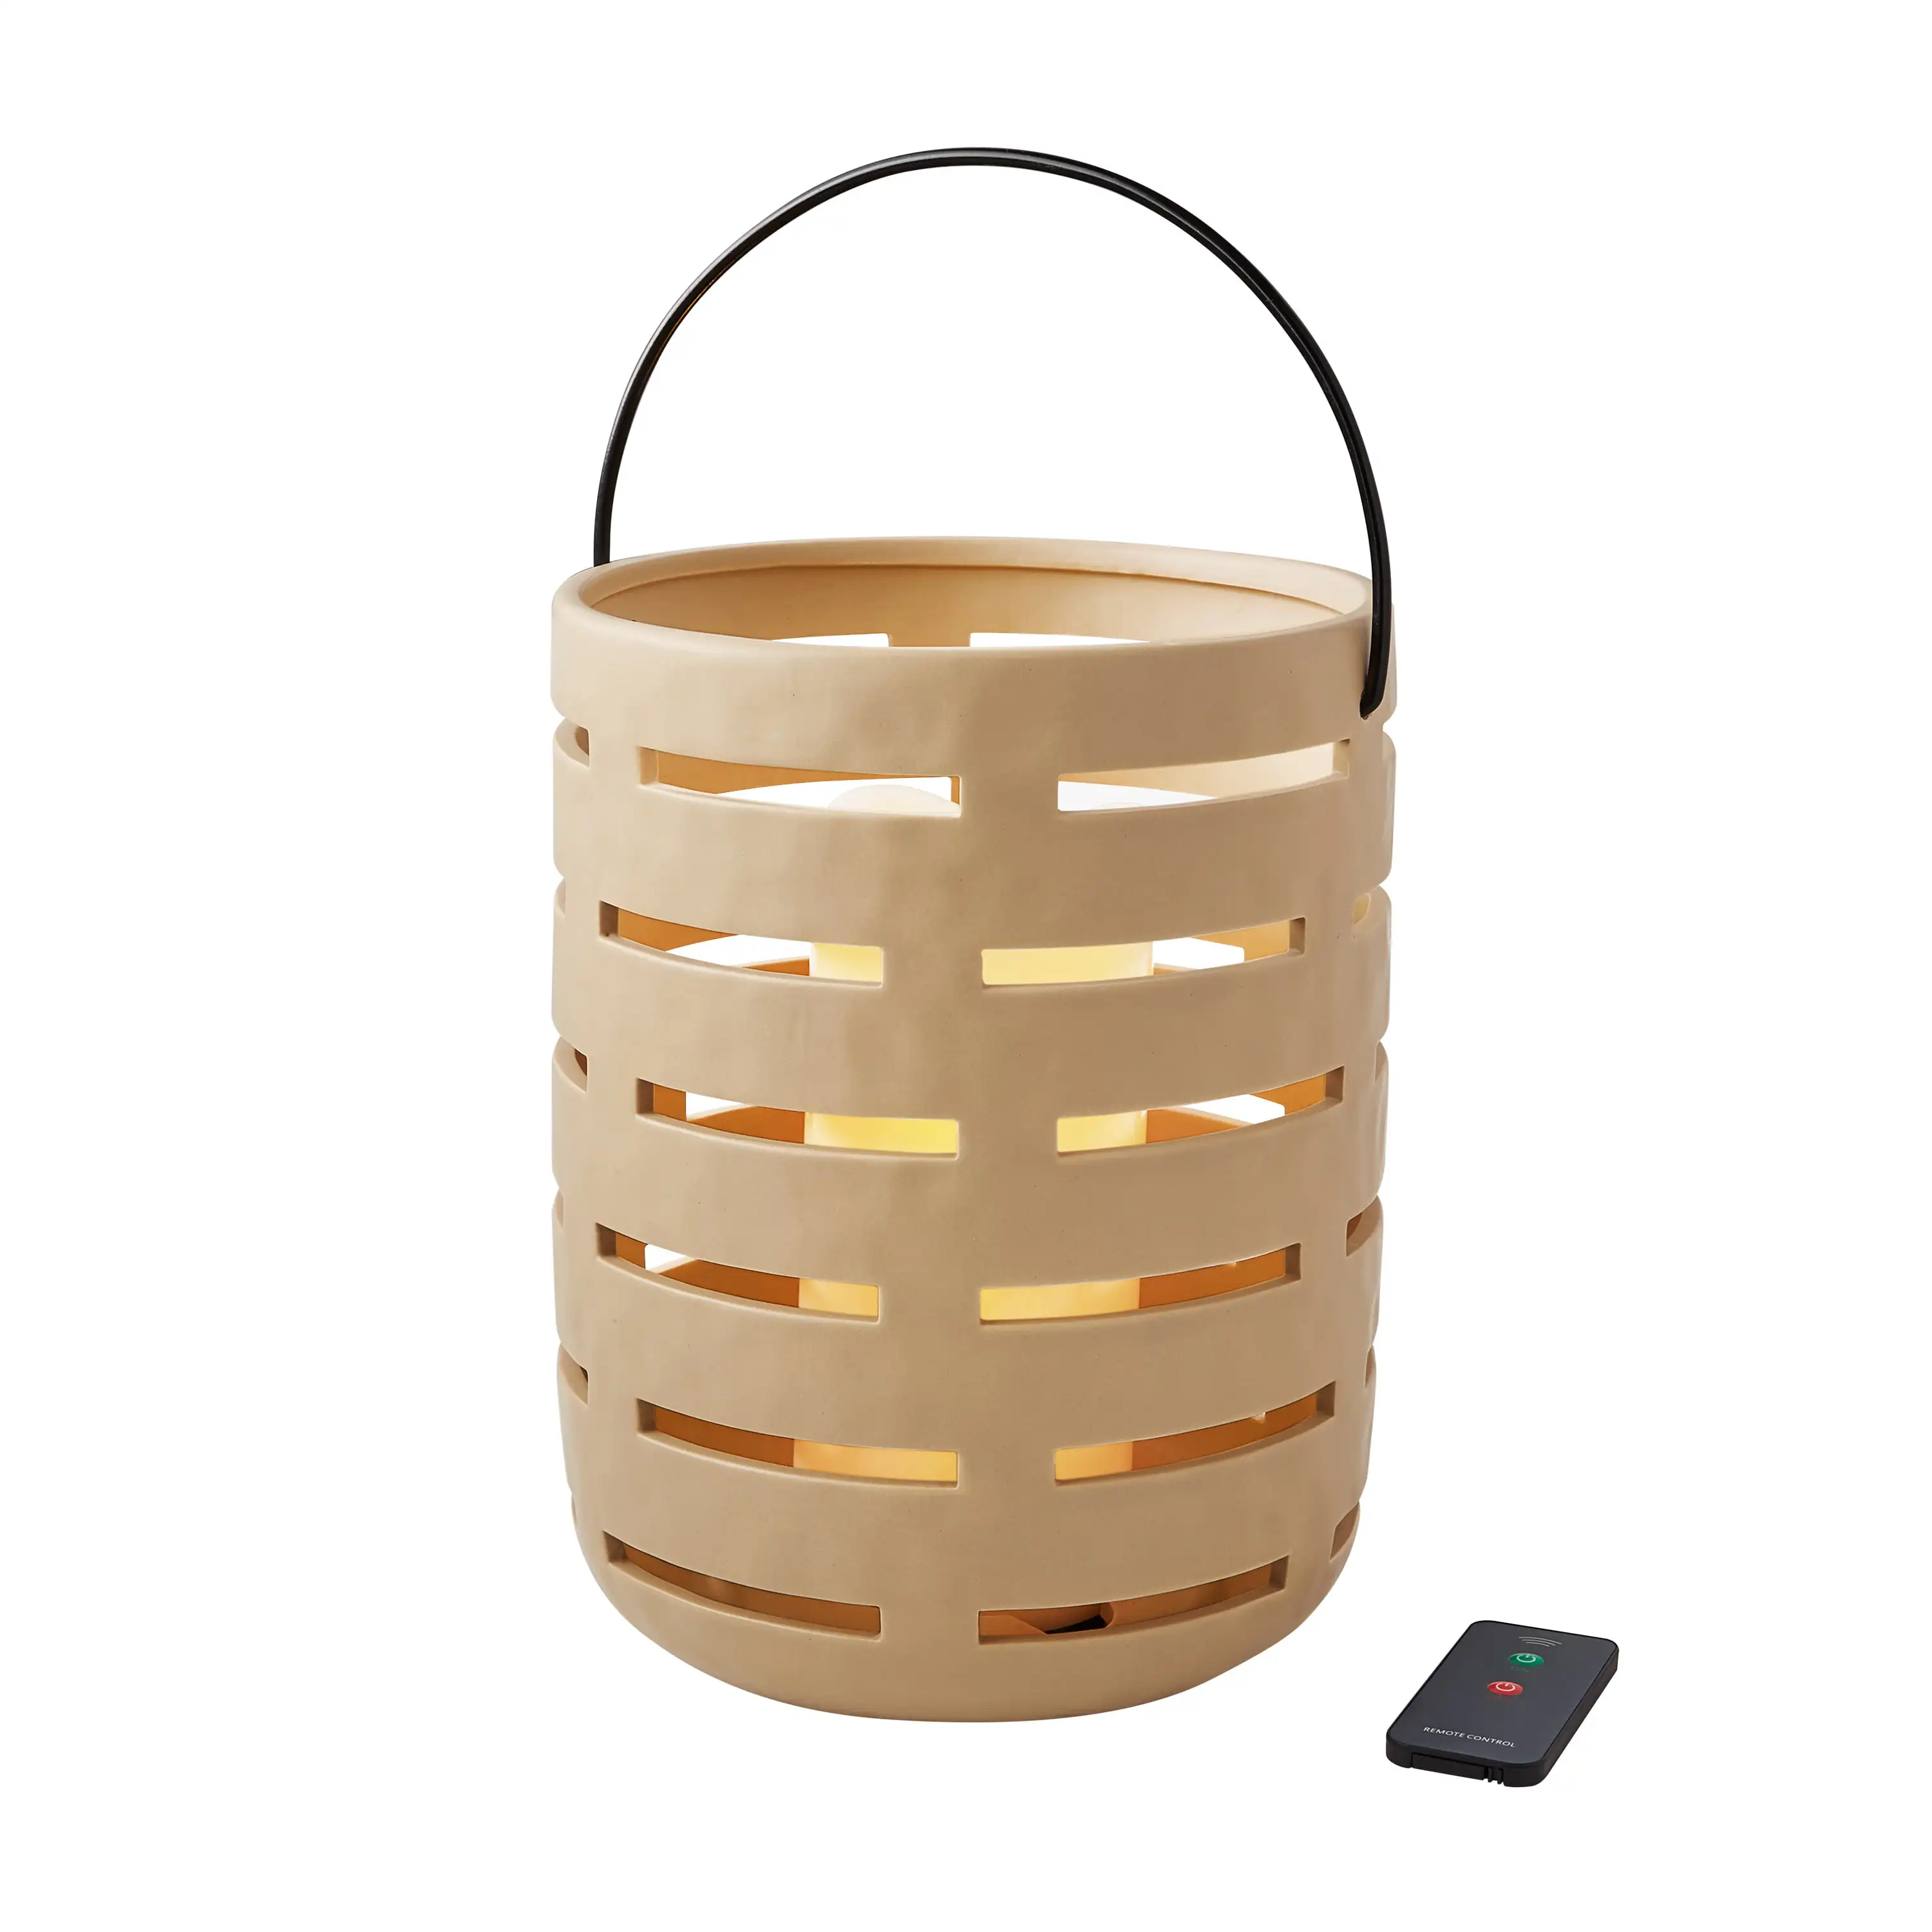 

HMTX Large Linen Beige Battery Operated Outdoor Ceramic Lantern with Removable LED Candle by Dave & Jenny Marrs